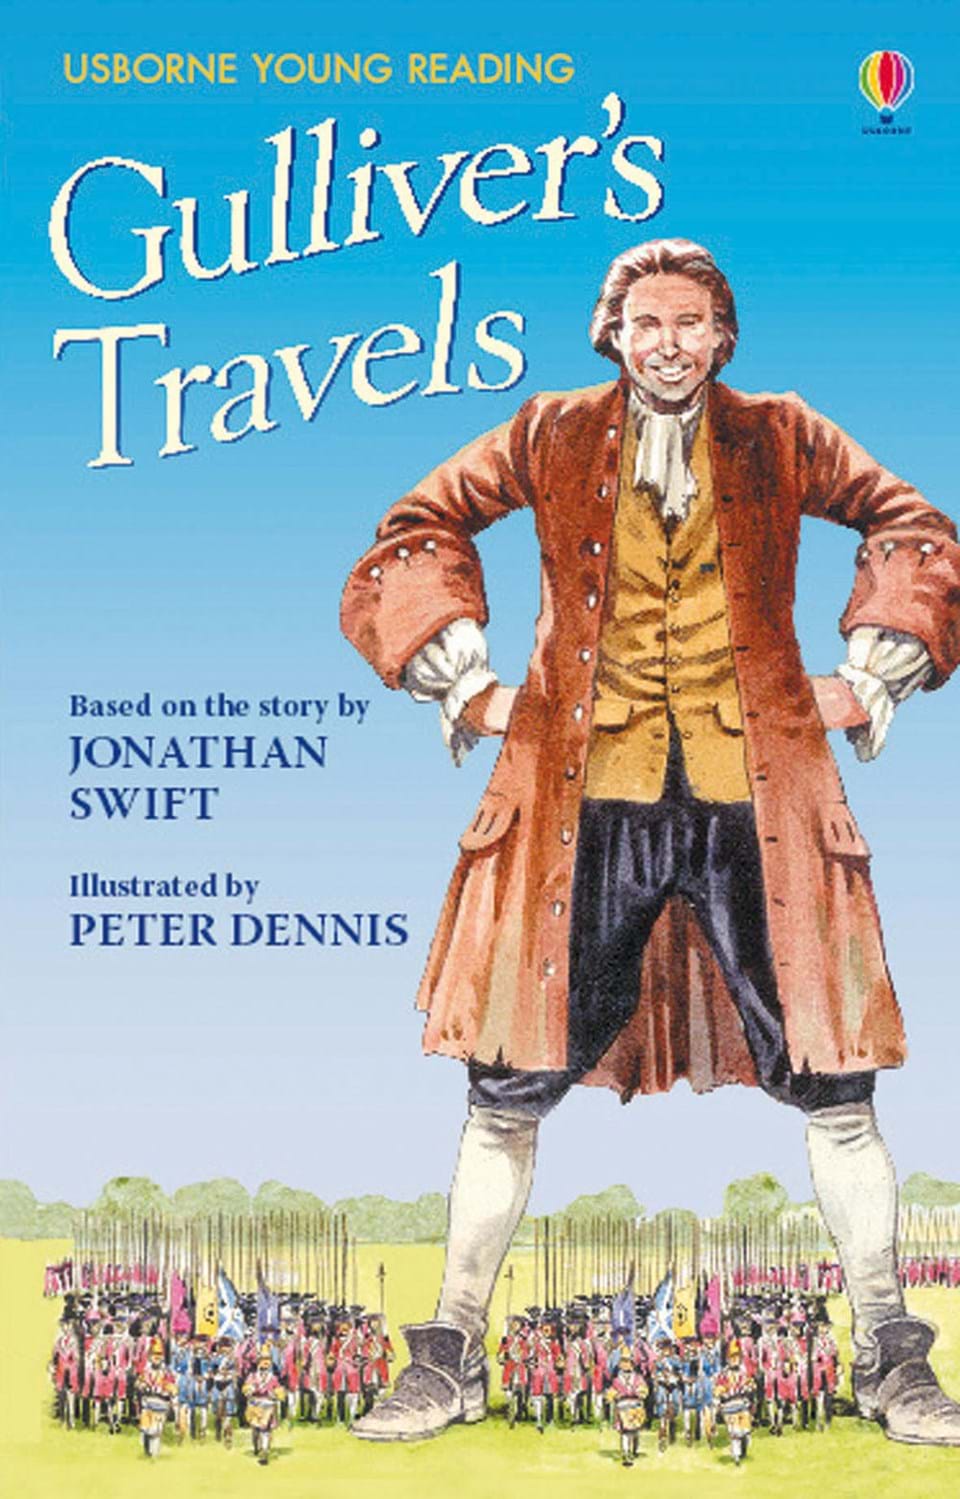 gulliver travels book review in english